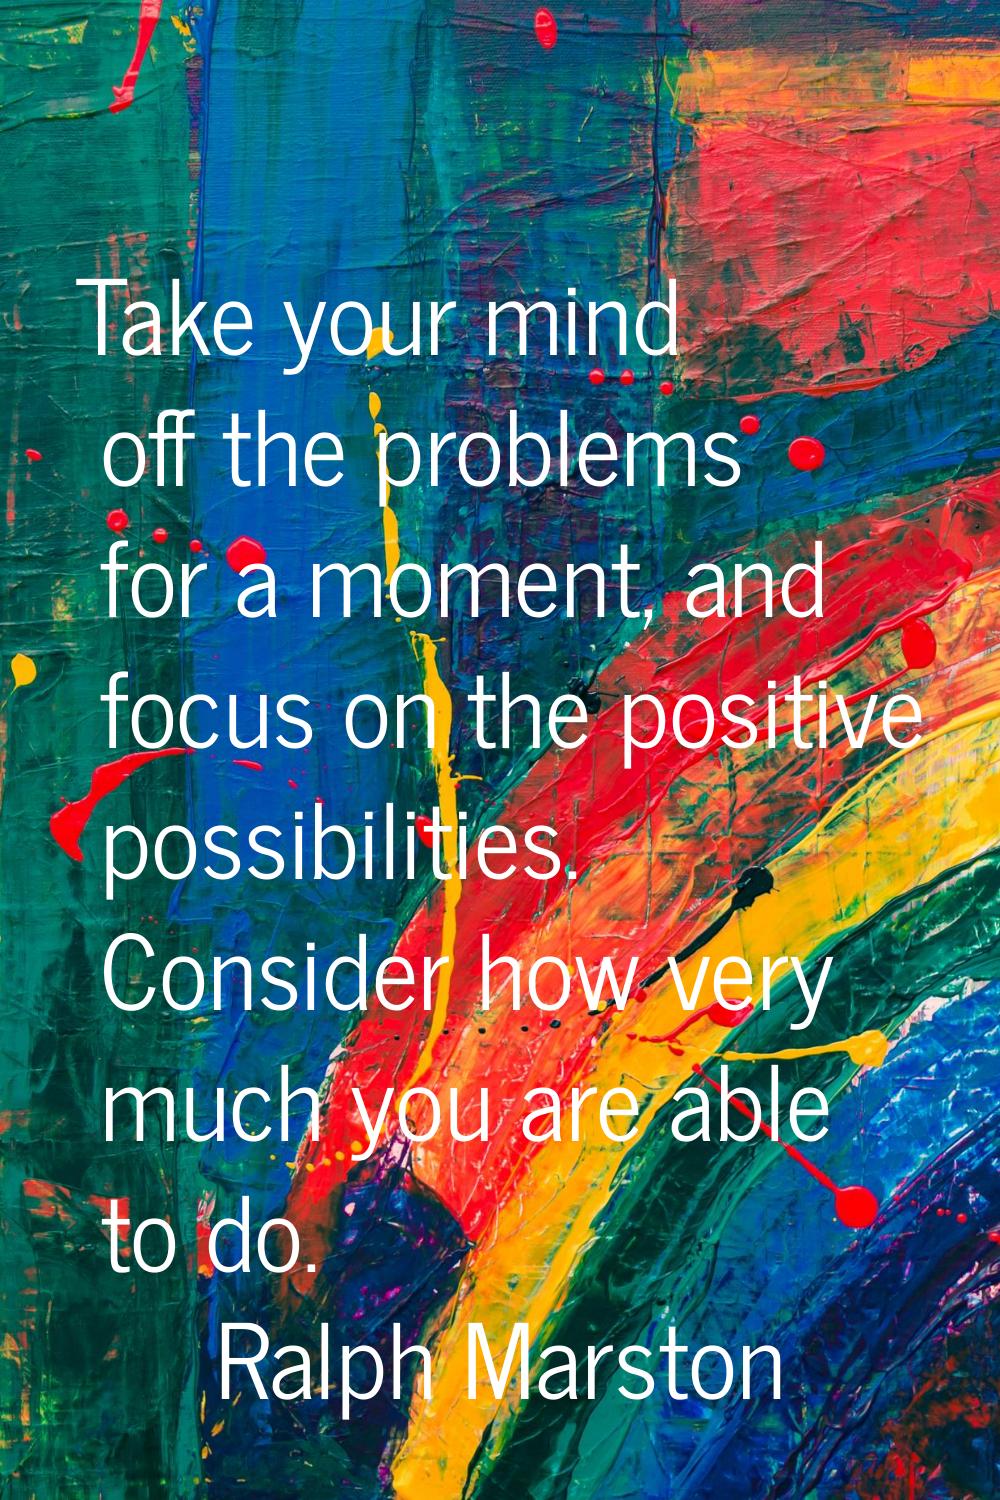 Take your mind off the problems for a moment, and focus on the positive possibilities. Consider how